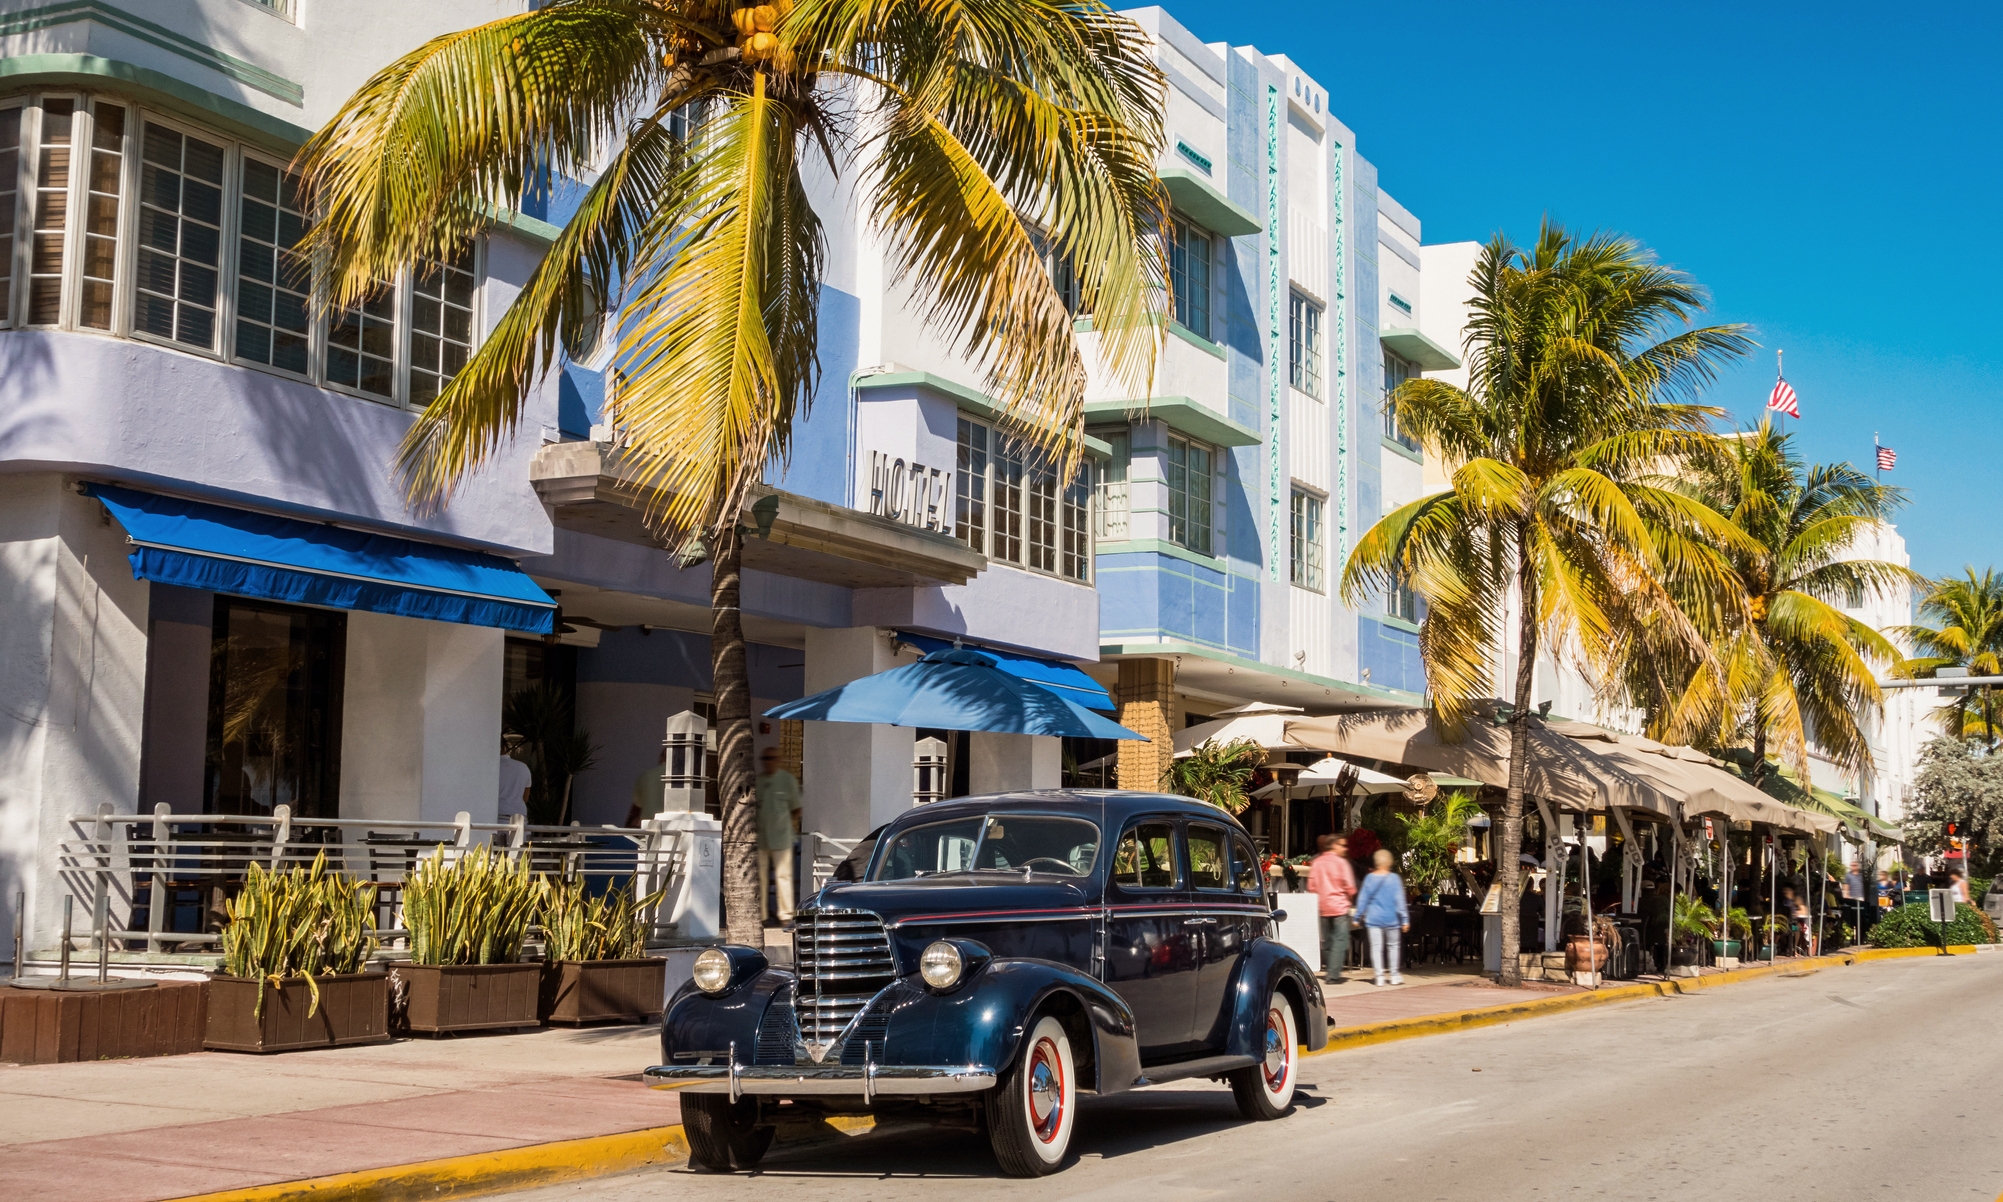 Parking in Miami Beach: 5 Great Spots to Park